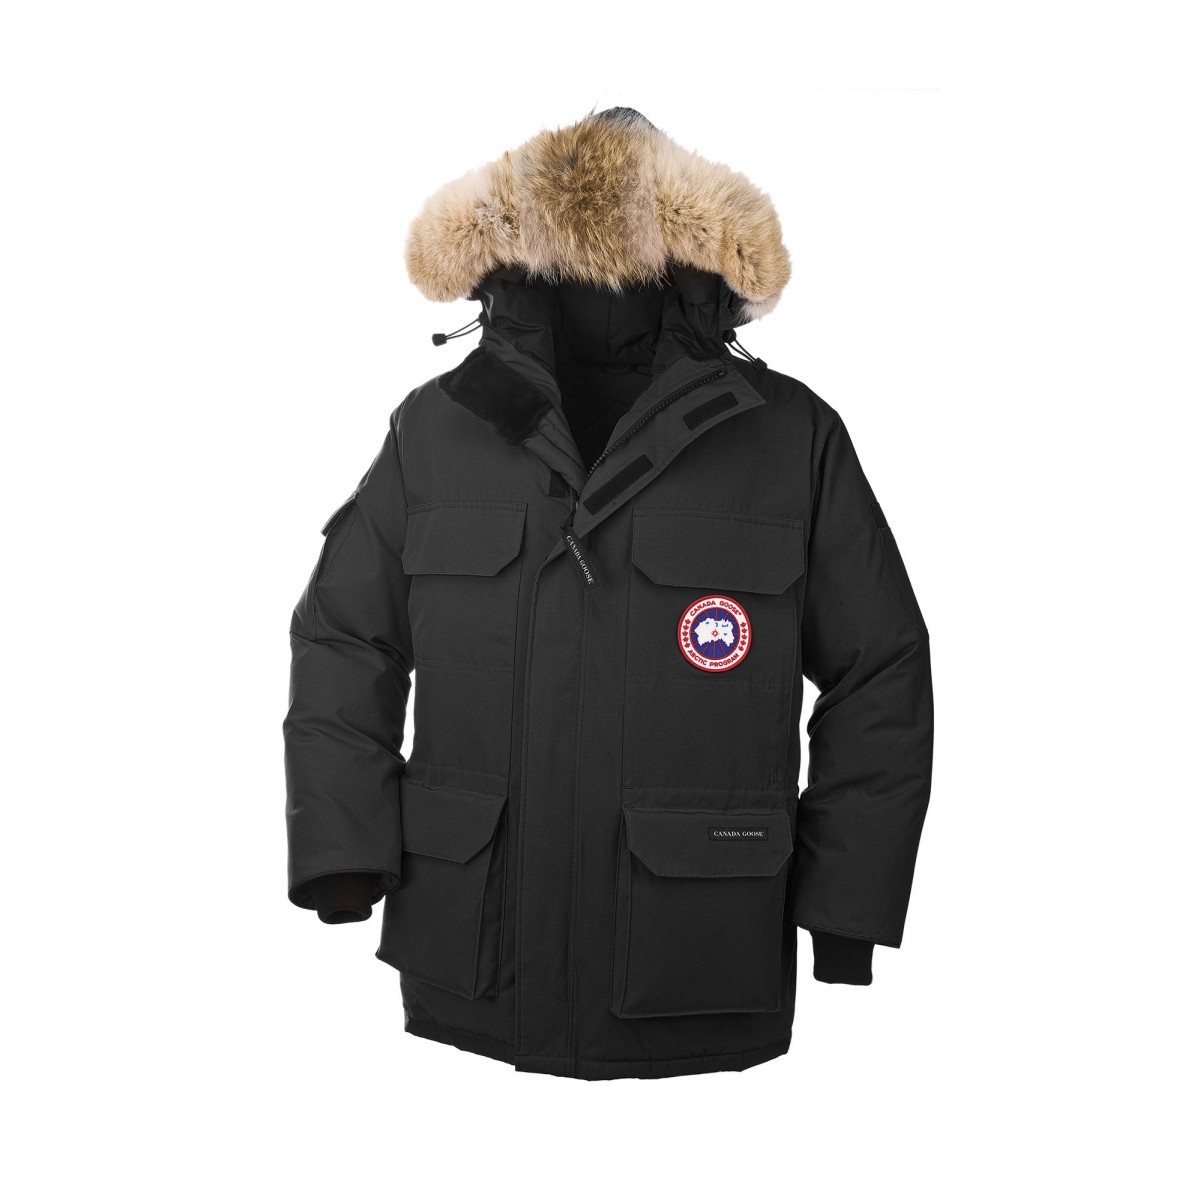 Canada Goose mens online authentic - 70% Off Cheap Canada Goose Jackets Sale